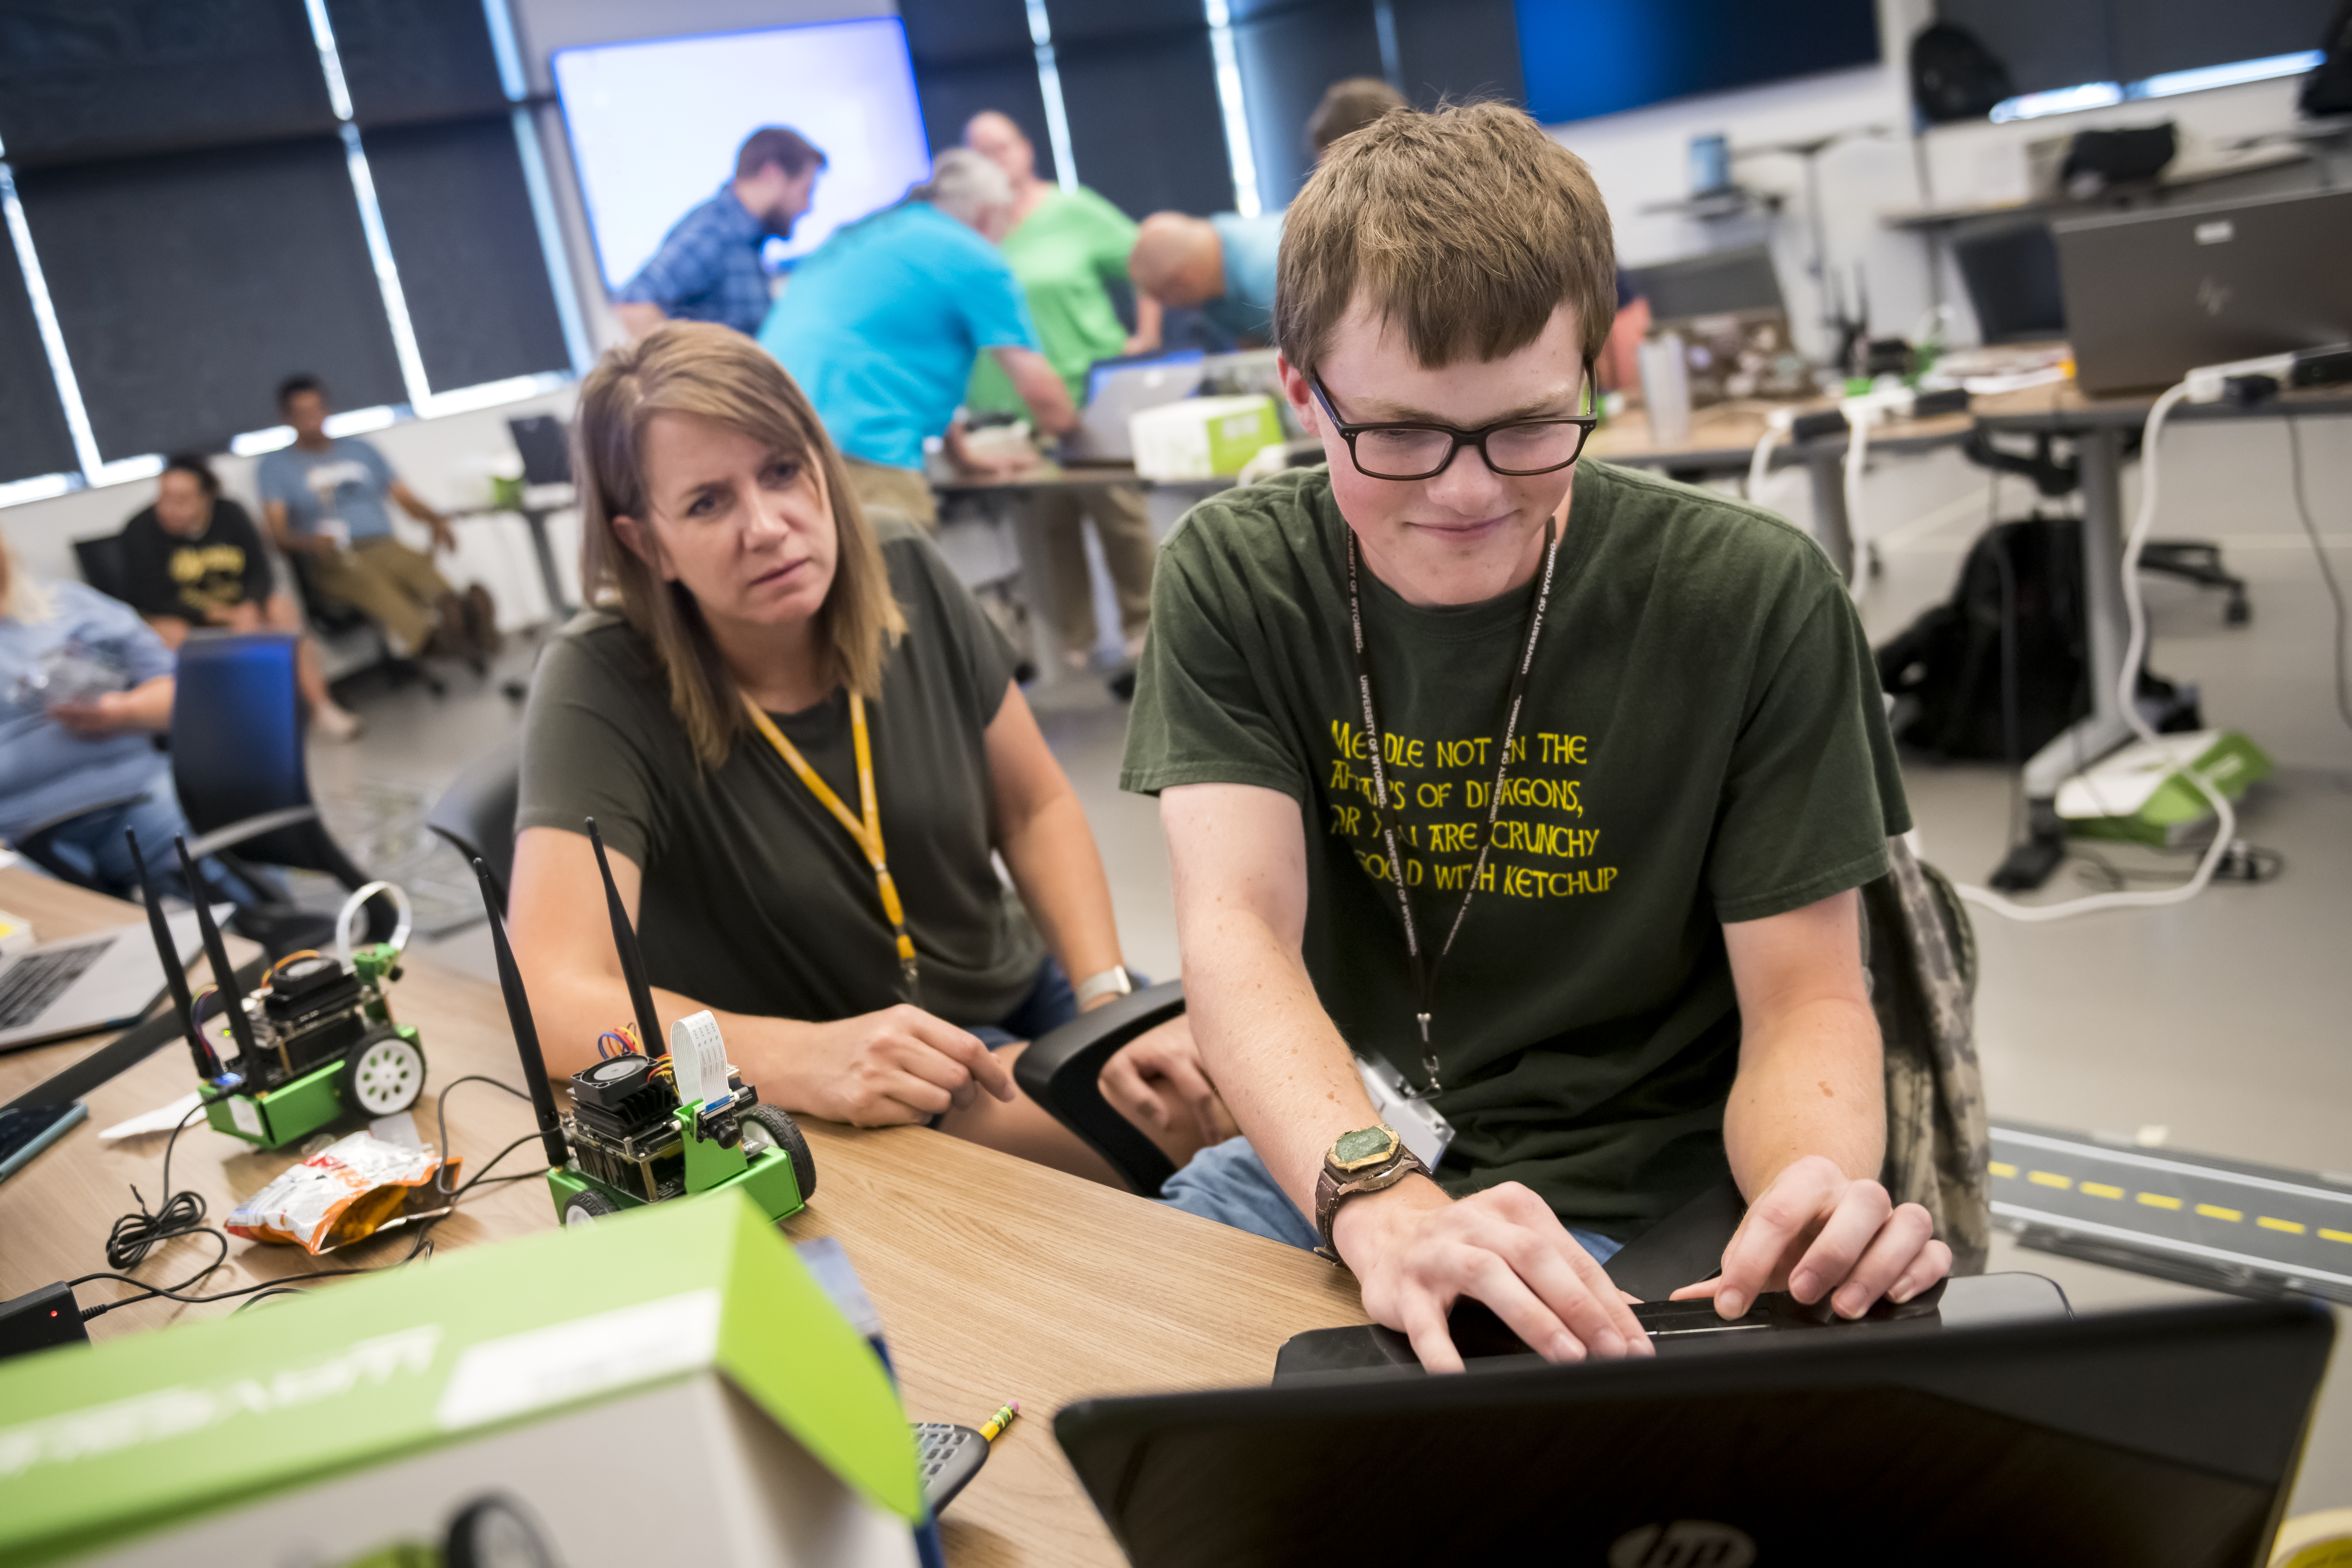 A teacher works to code with a high school student